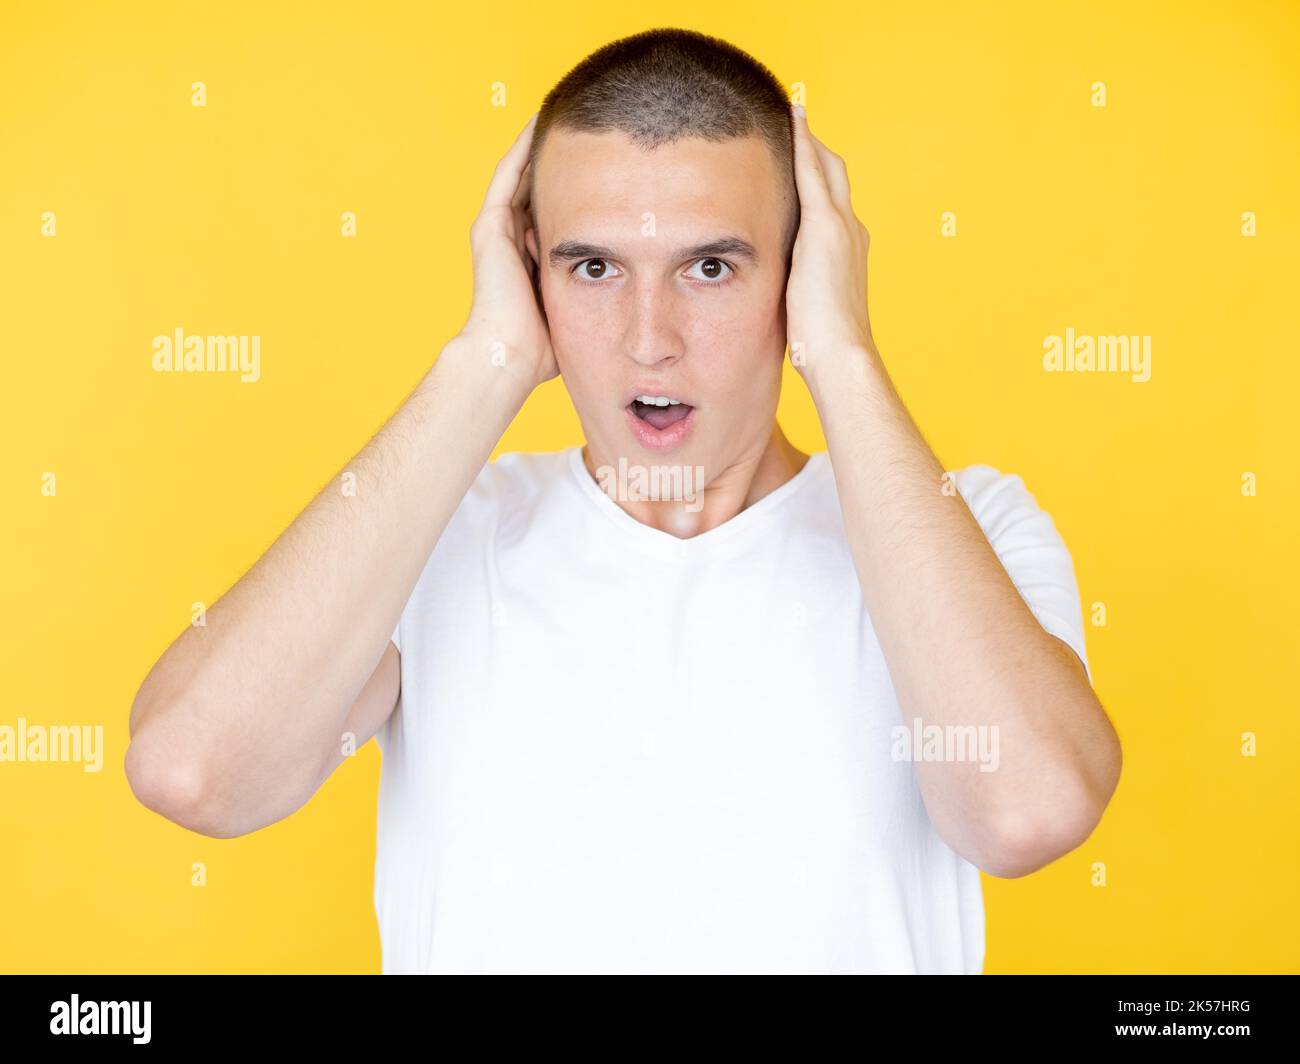 shocked situation disbelief man unexpected Stock Photo